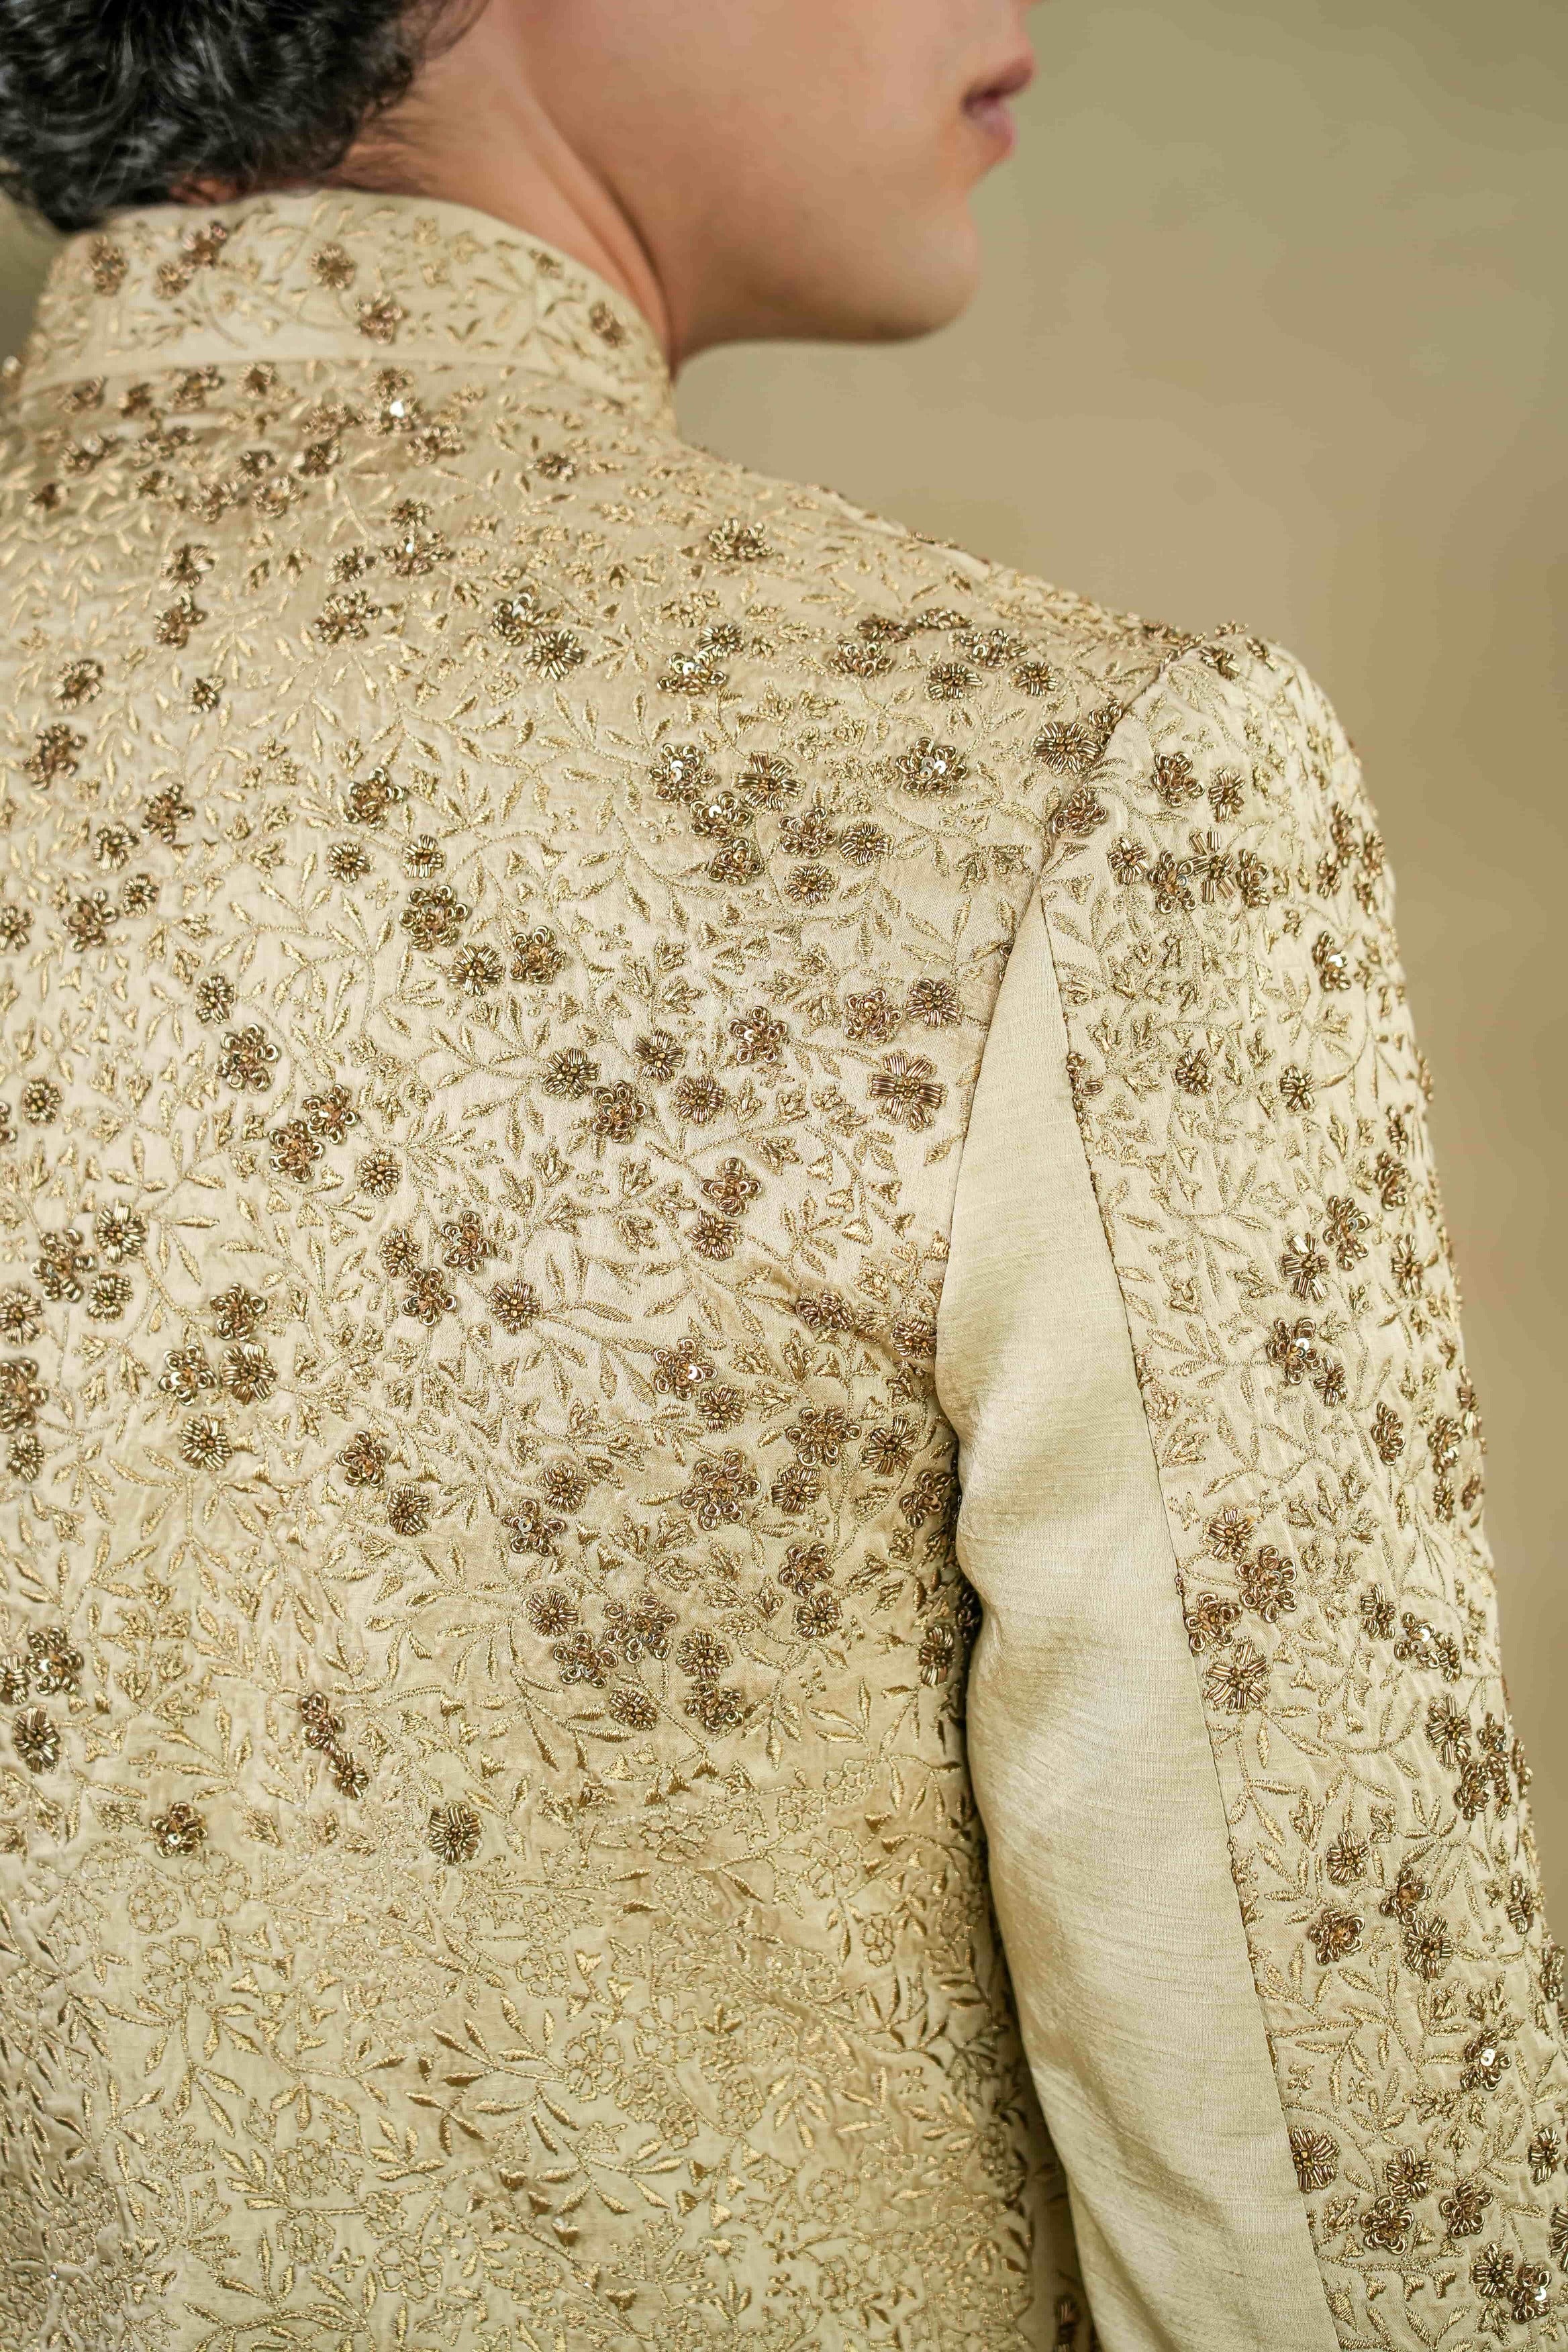 Back view of the Sandune Sherwani, showcasing detailed embroidery and a tailored fit.